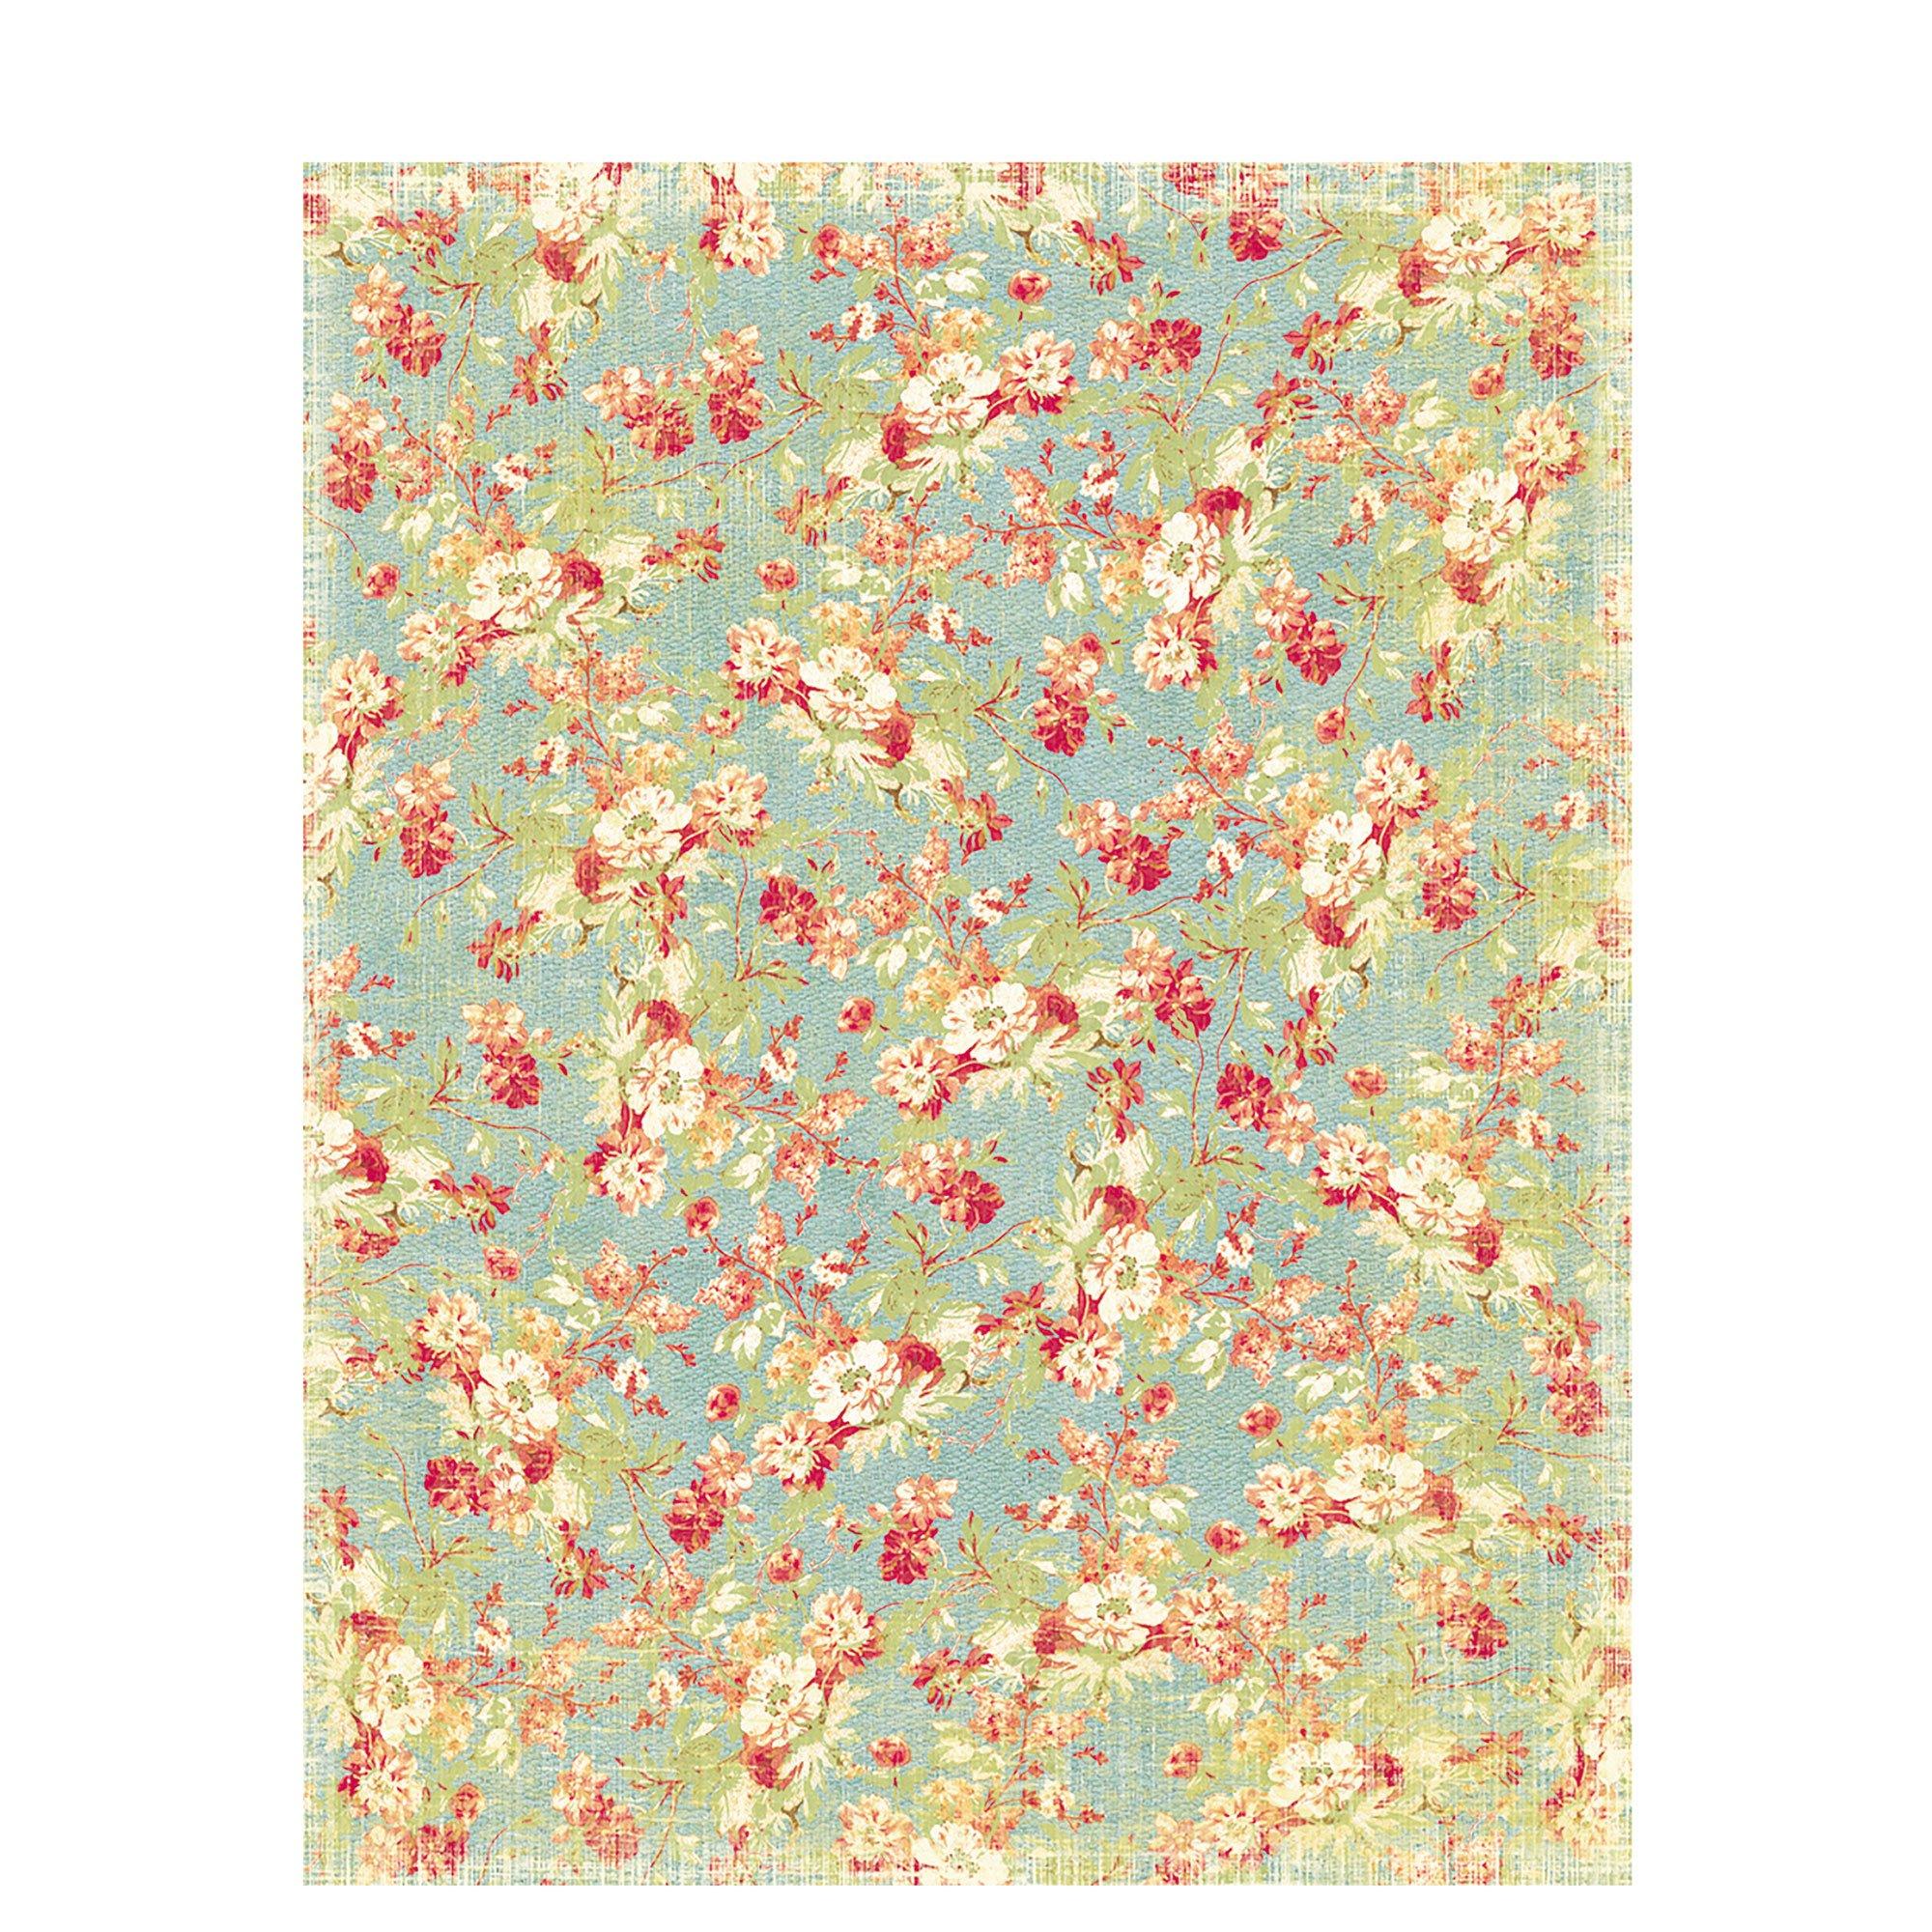 Dried Floral Scrapbook Paper - 8 1/2 x 11, Hobby Lobby